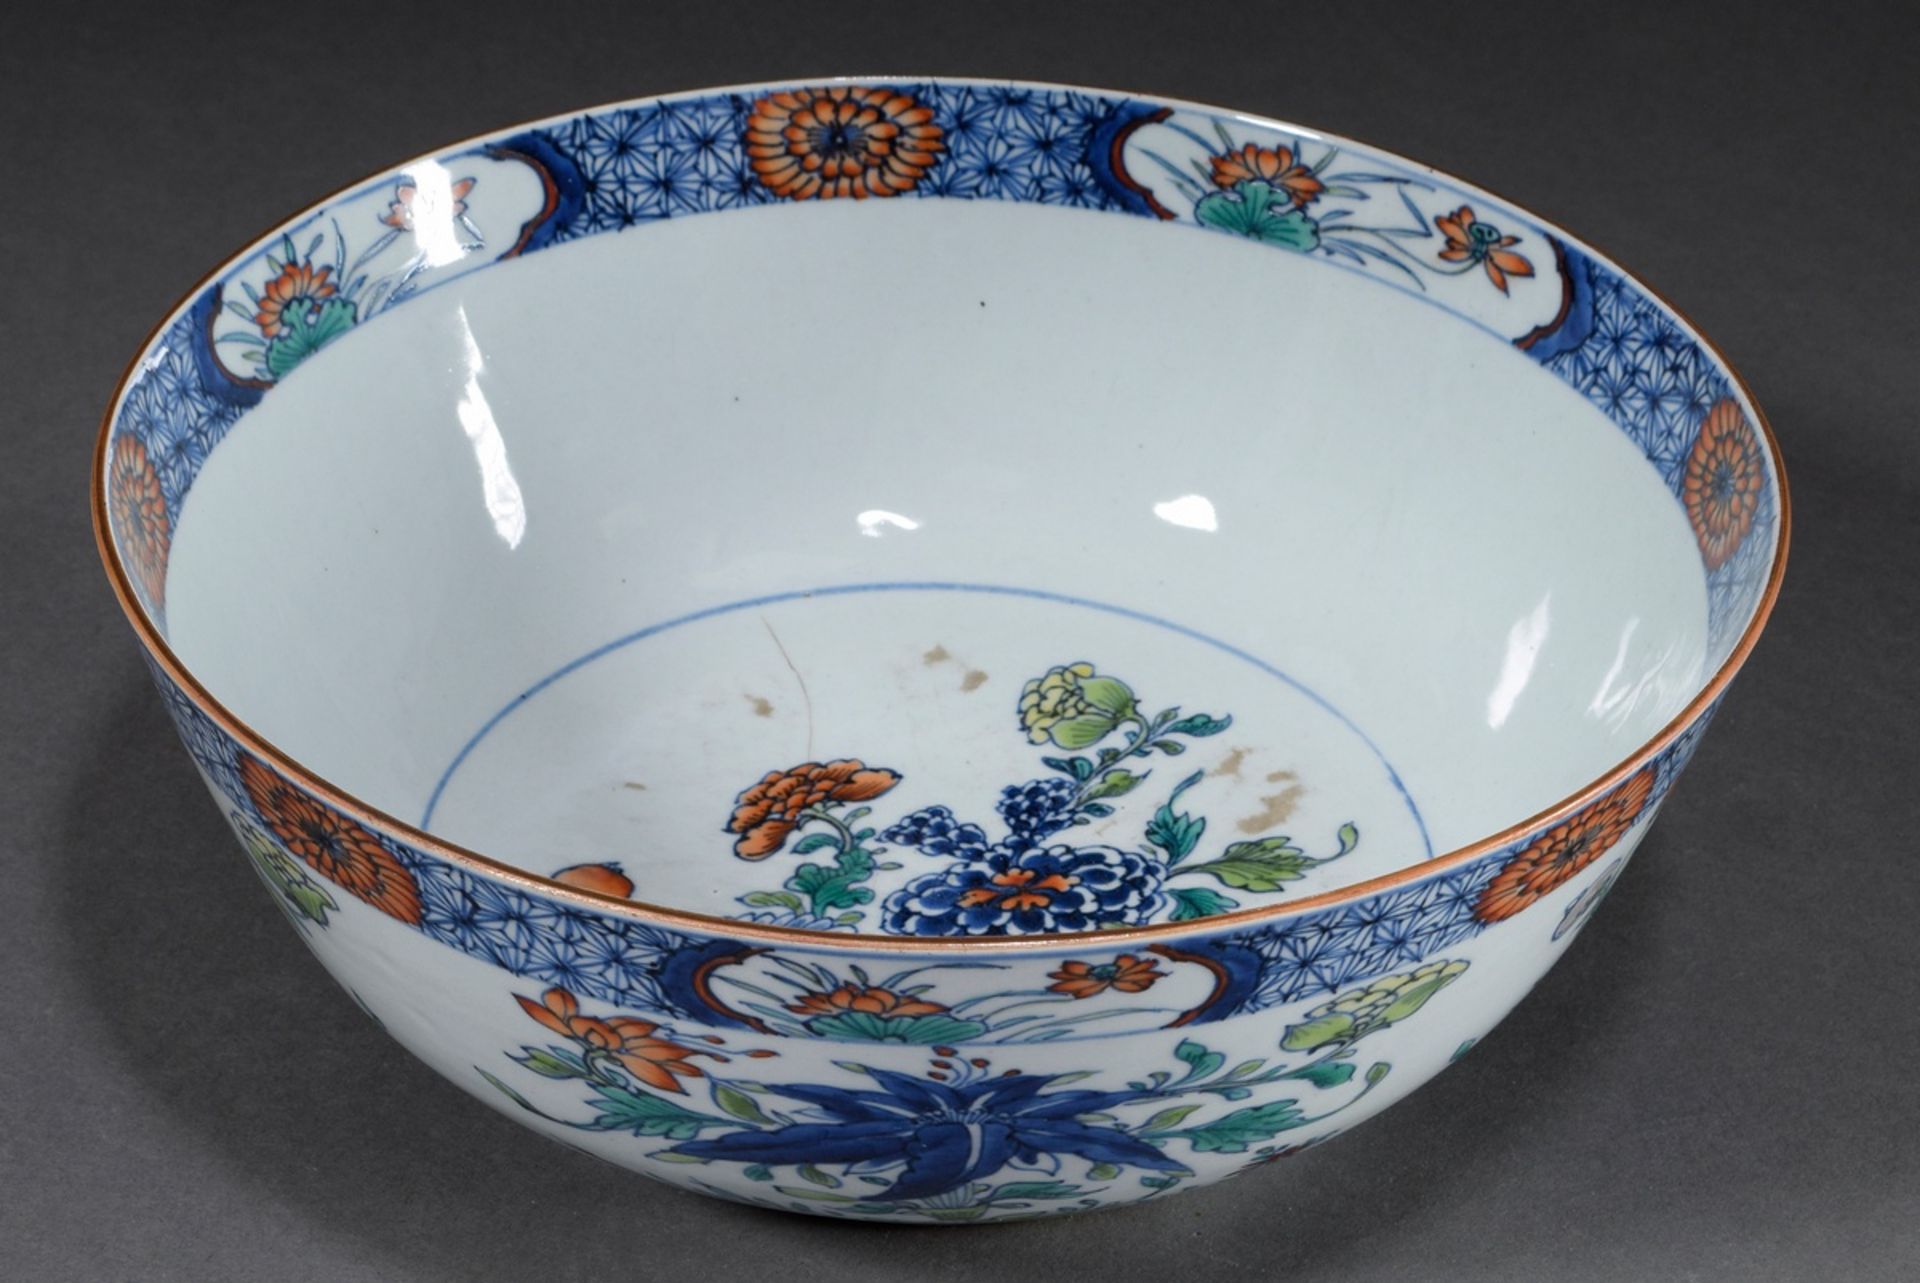 Large doucai bowl with floral blue painting and coloured decoration, China probably 2nd half 18th c - Image 2 of 4